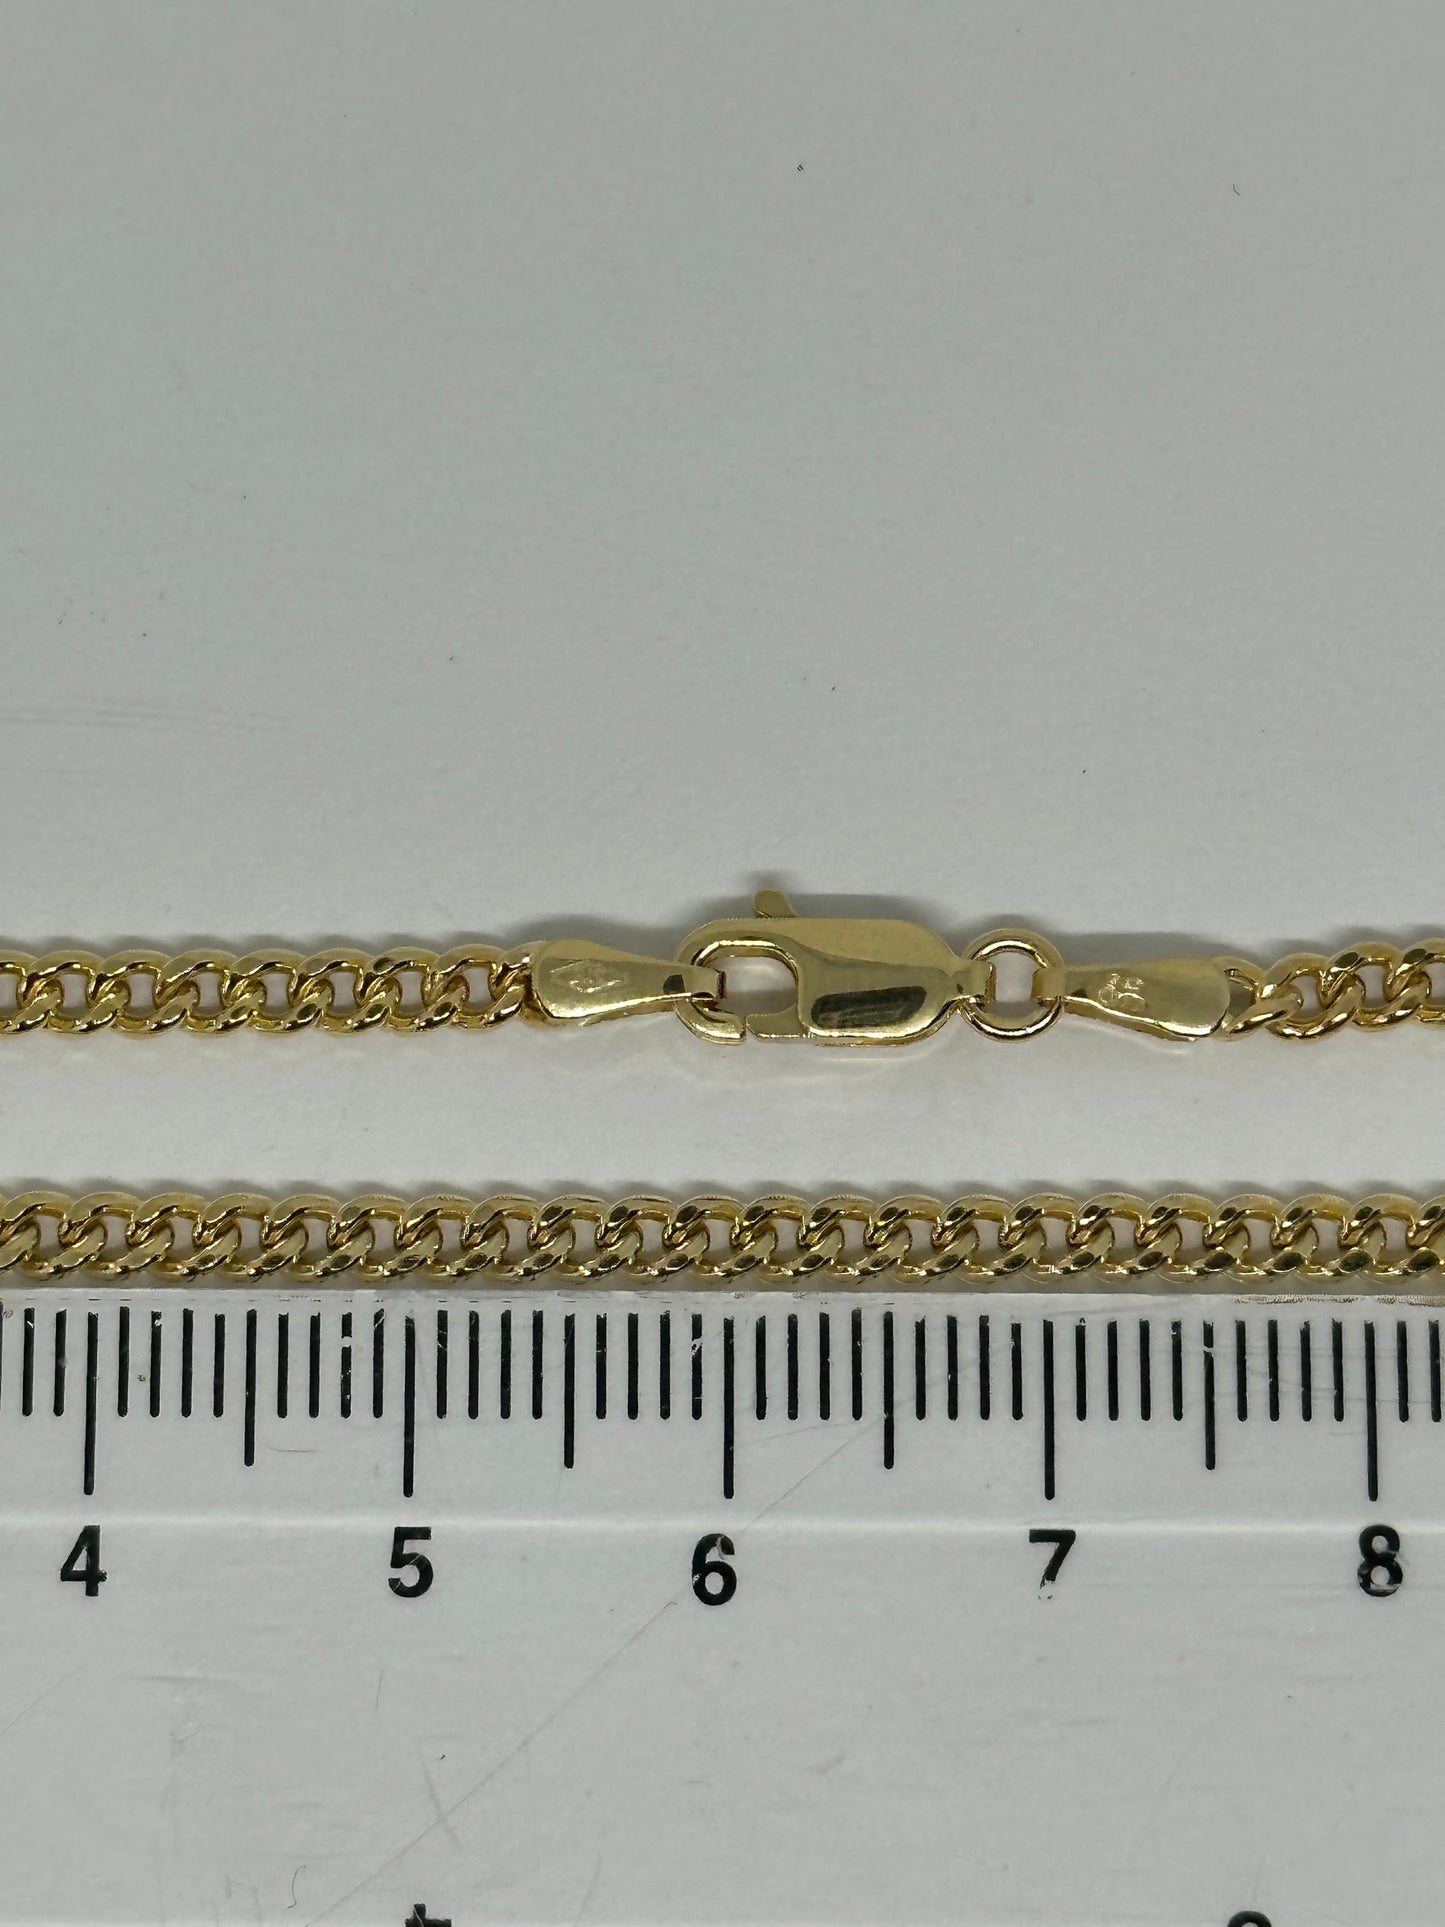 9ct Yellow Gold 3mm Semi Solid Close Curb Chain (281)